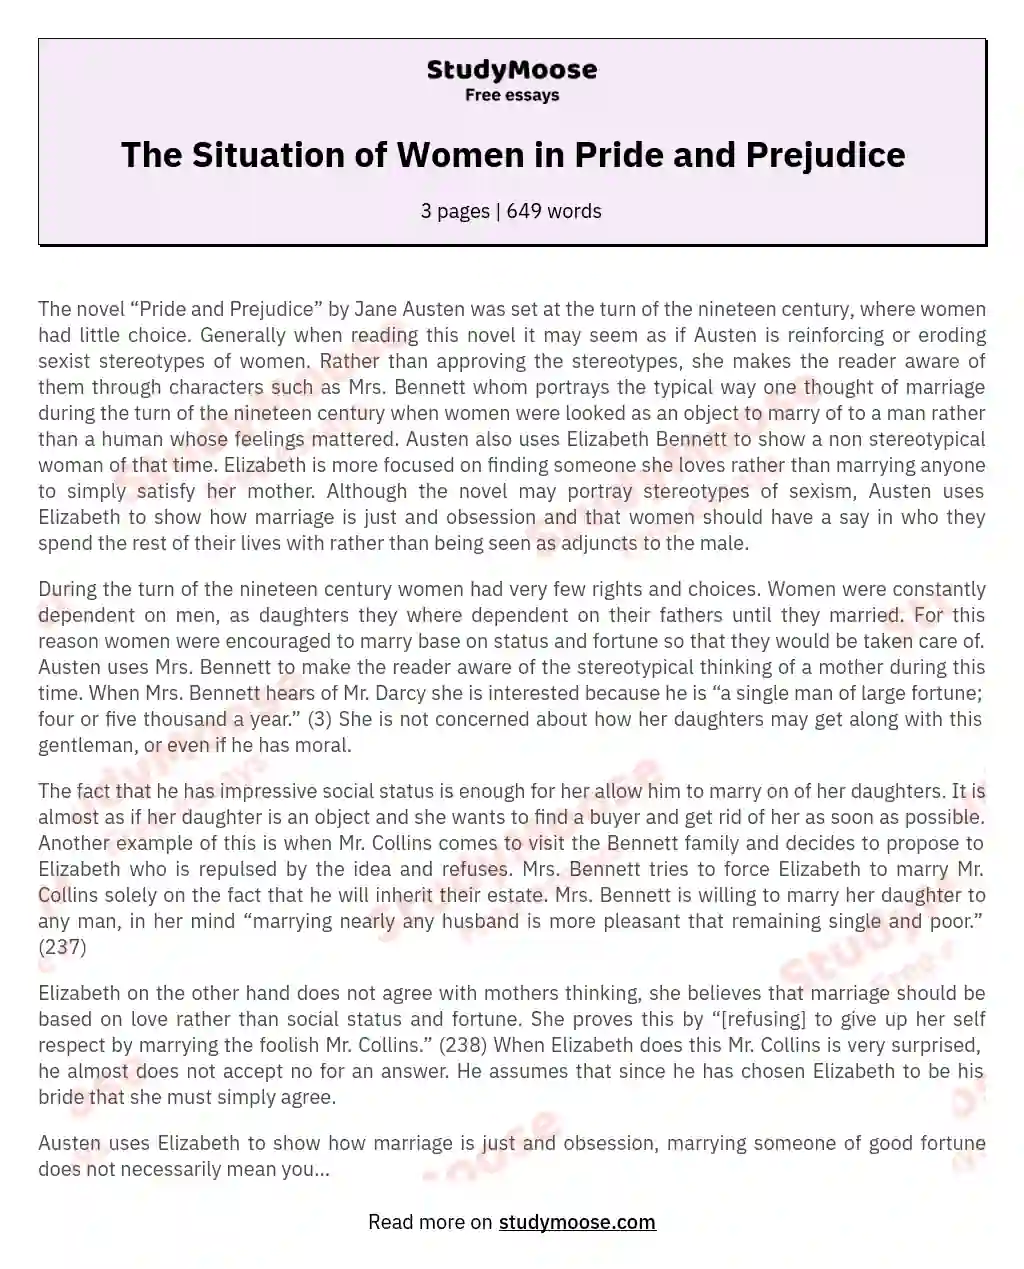 The Situation of Women in Pride and Prejudice